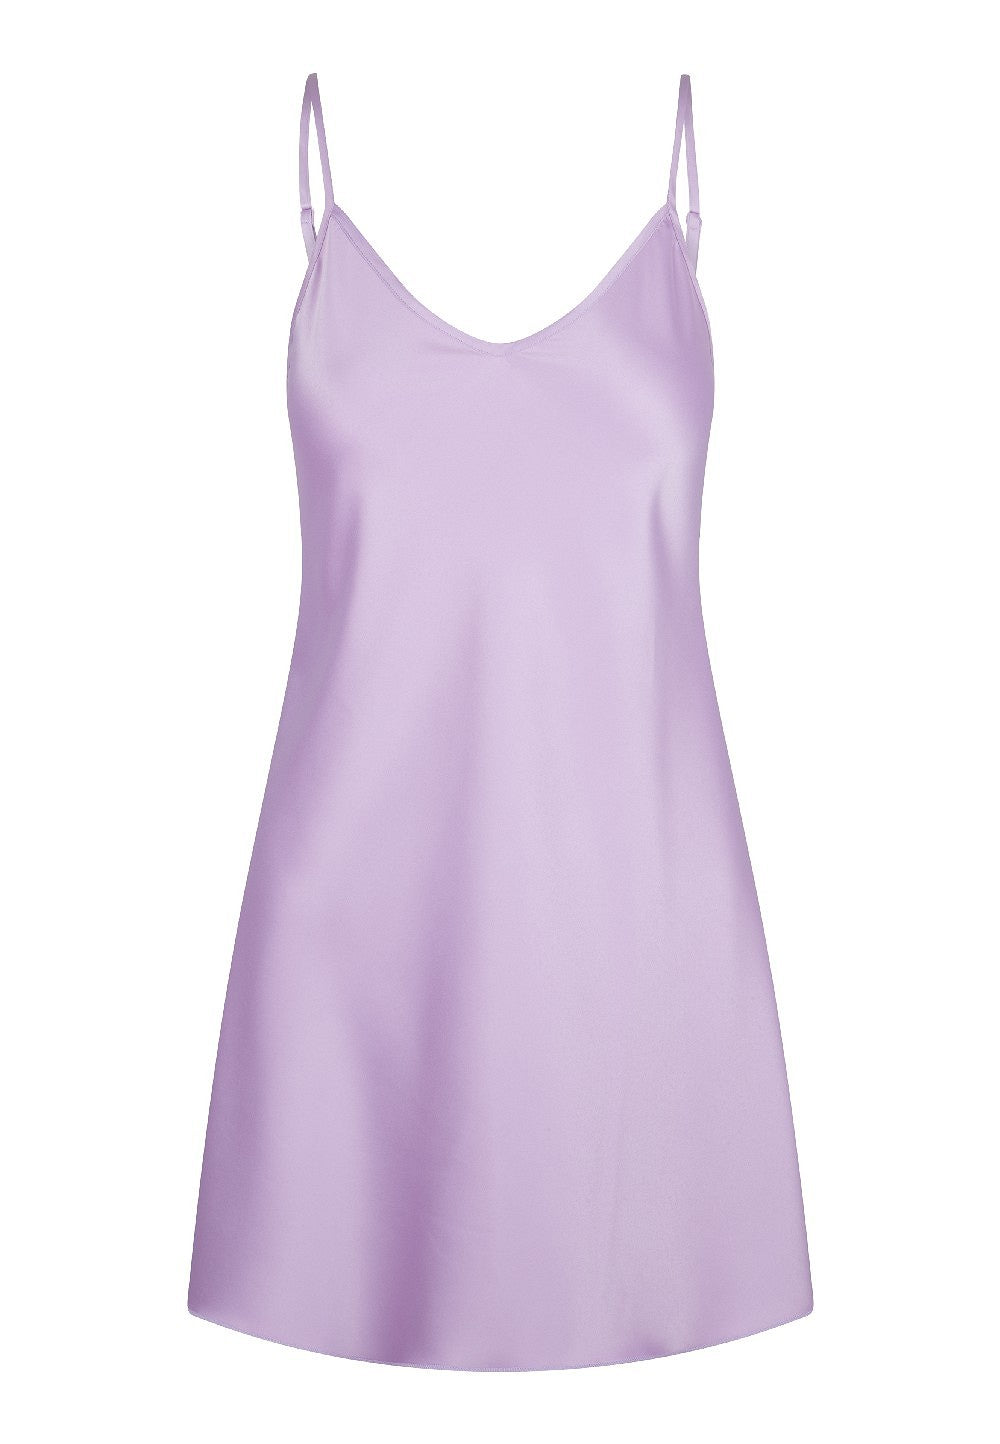 LingaDore Daily Collection Chemise - Pink Lavender